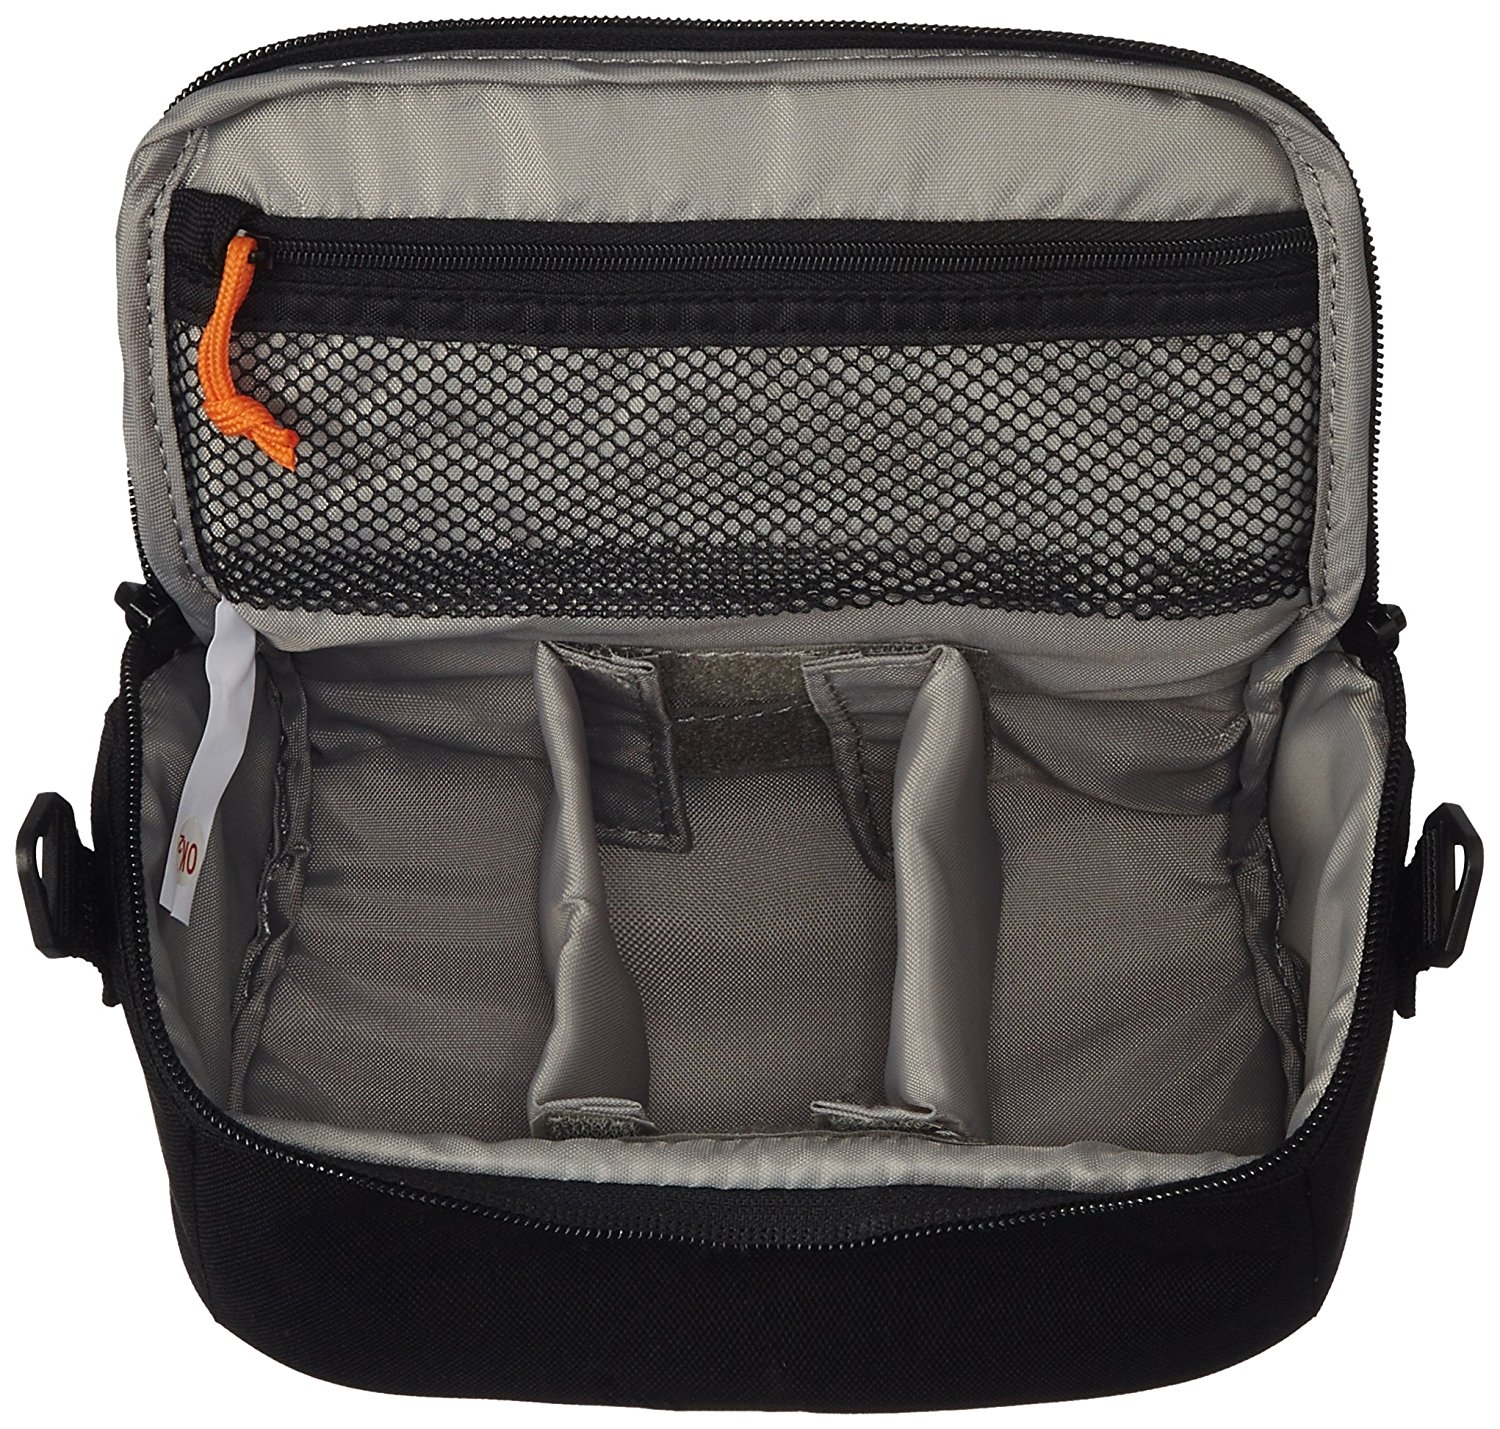 Lowepro Format 110 Camera and Accessory Bag Black